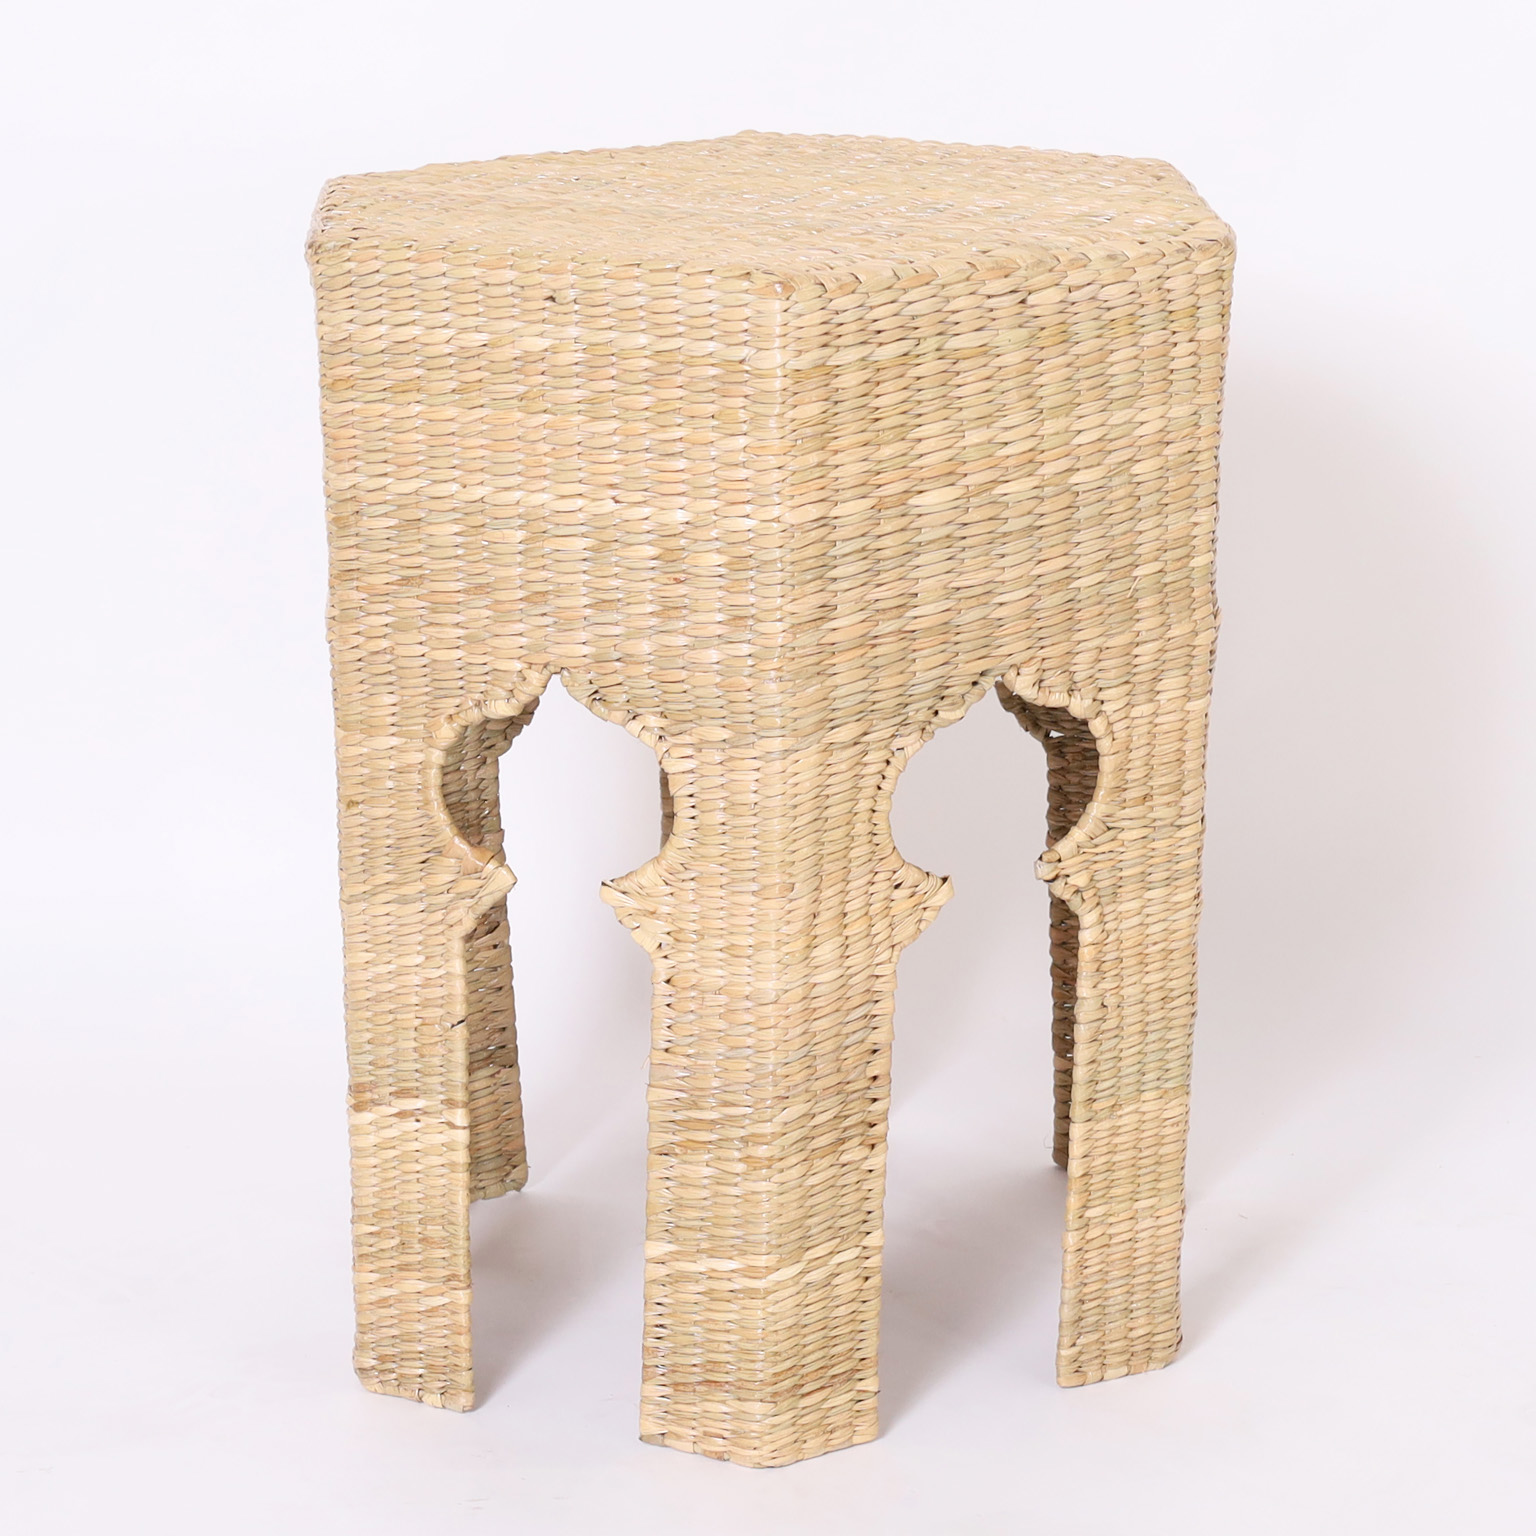 Pair of Woven Reed Moorish Style Stands or Tables from the FS Flores Collection